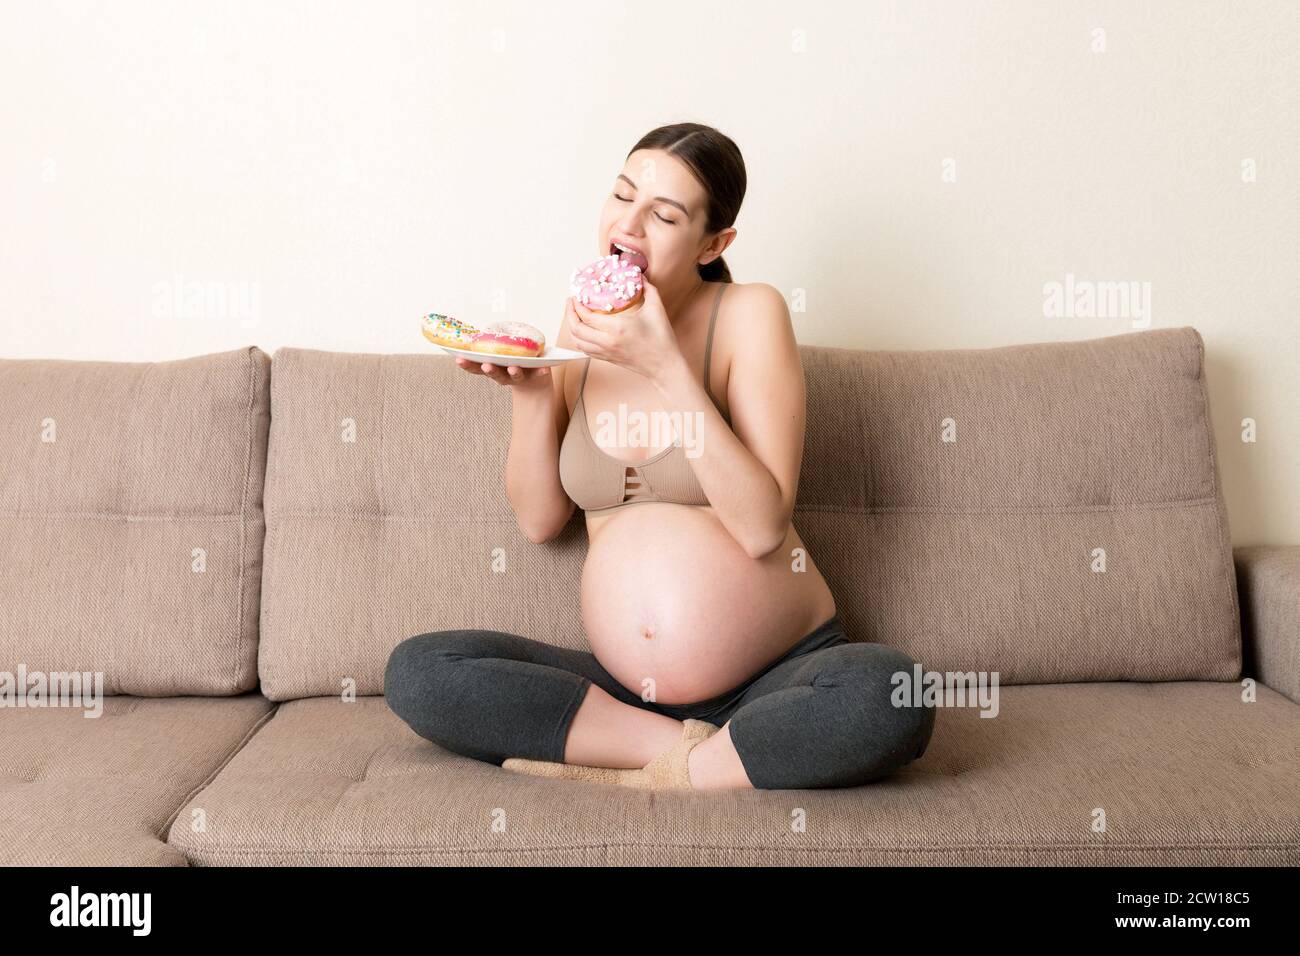 Pregnant woman is eating many donuts relaxing on the sofa. Unhealthy dieting during pregnancy concept. Stock Photo